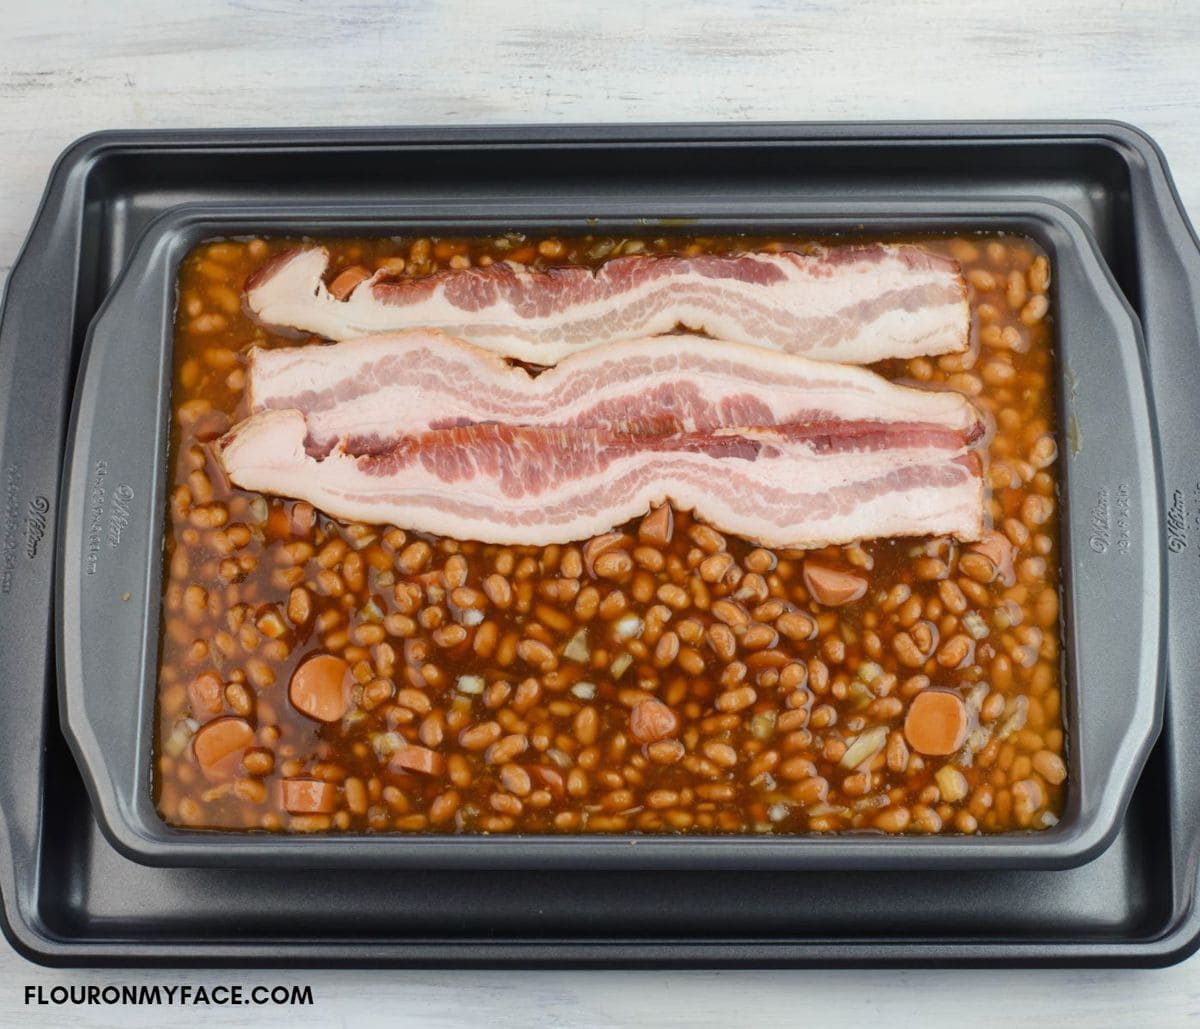 Arranging bacon slices on top of the beans.